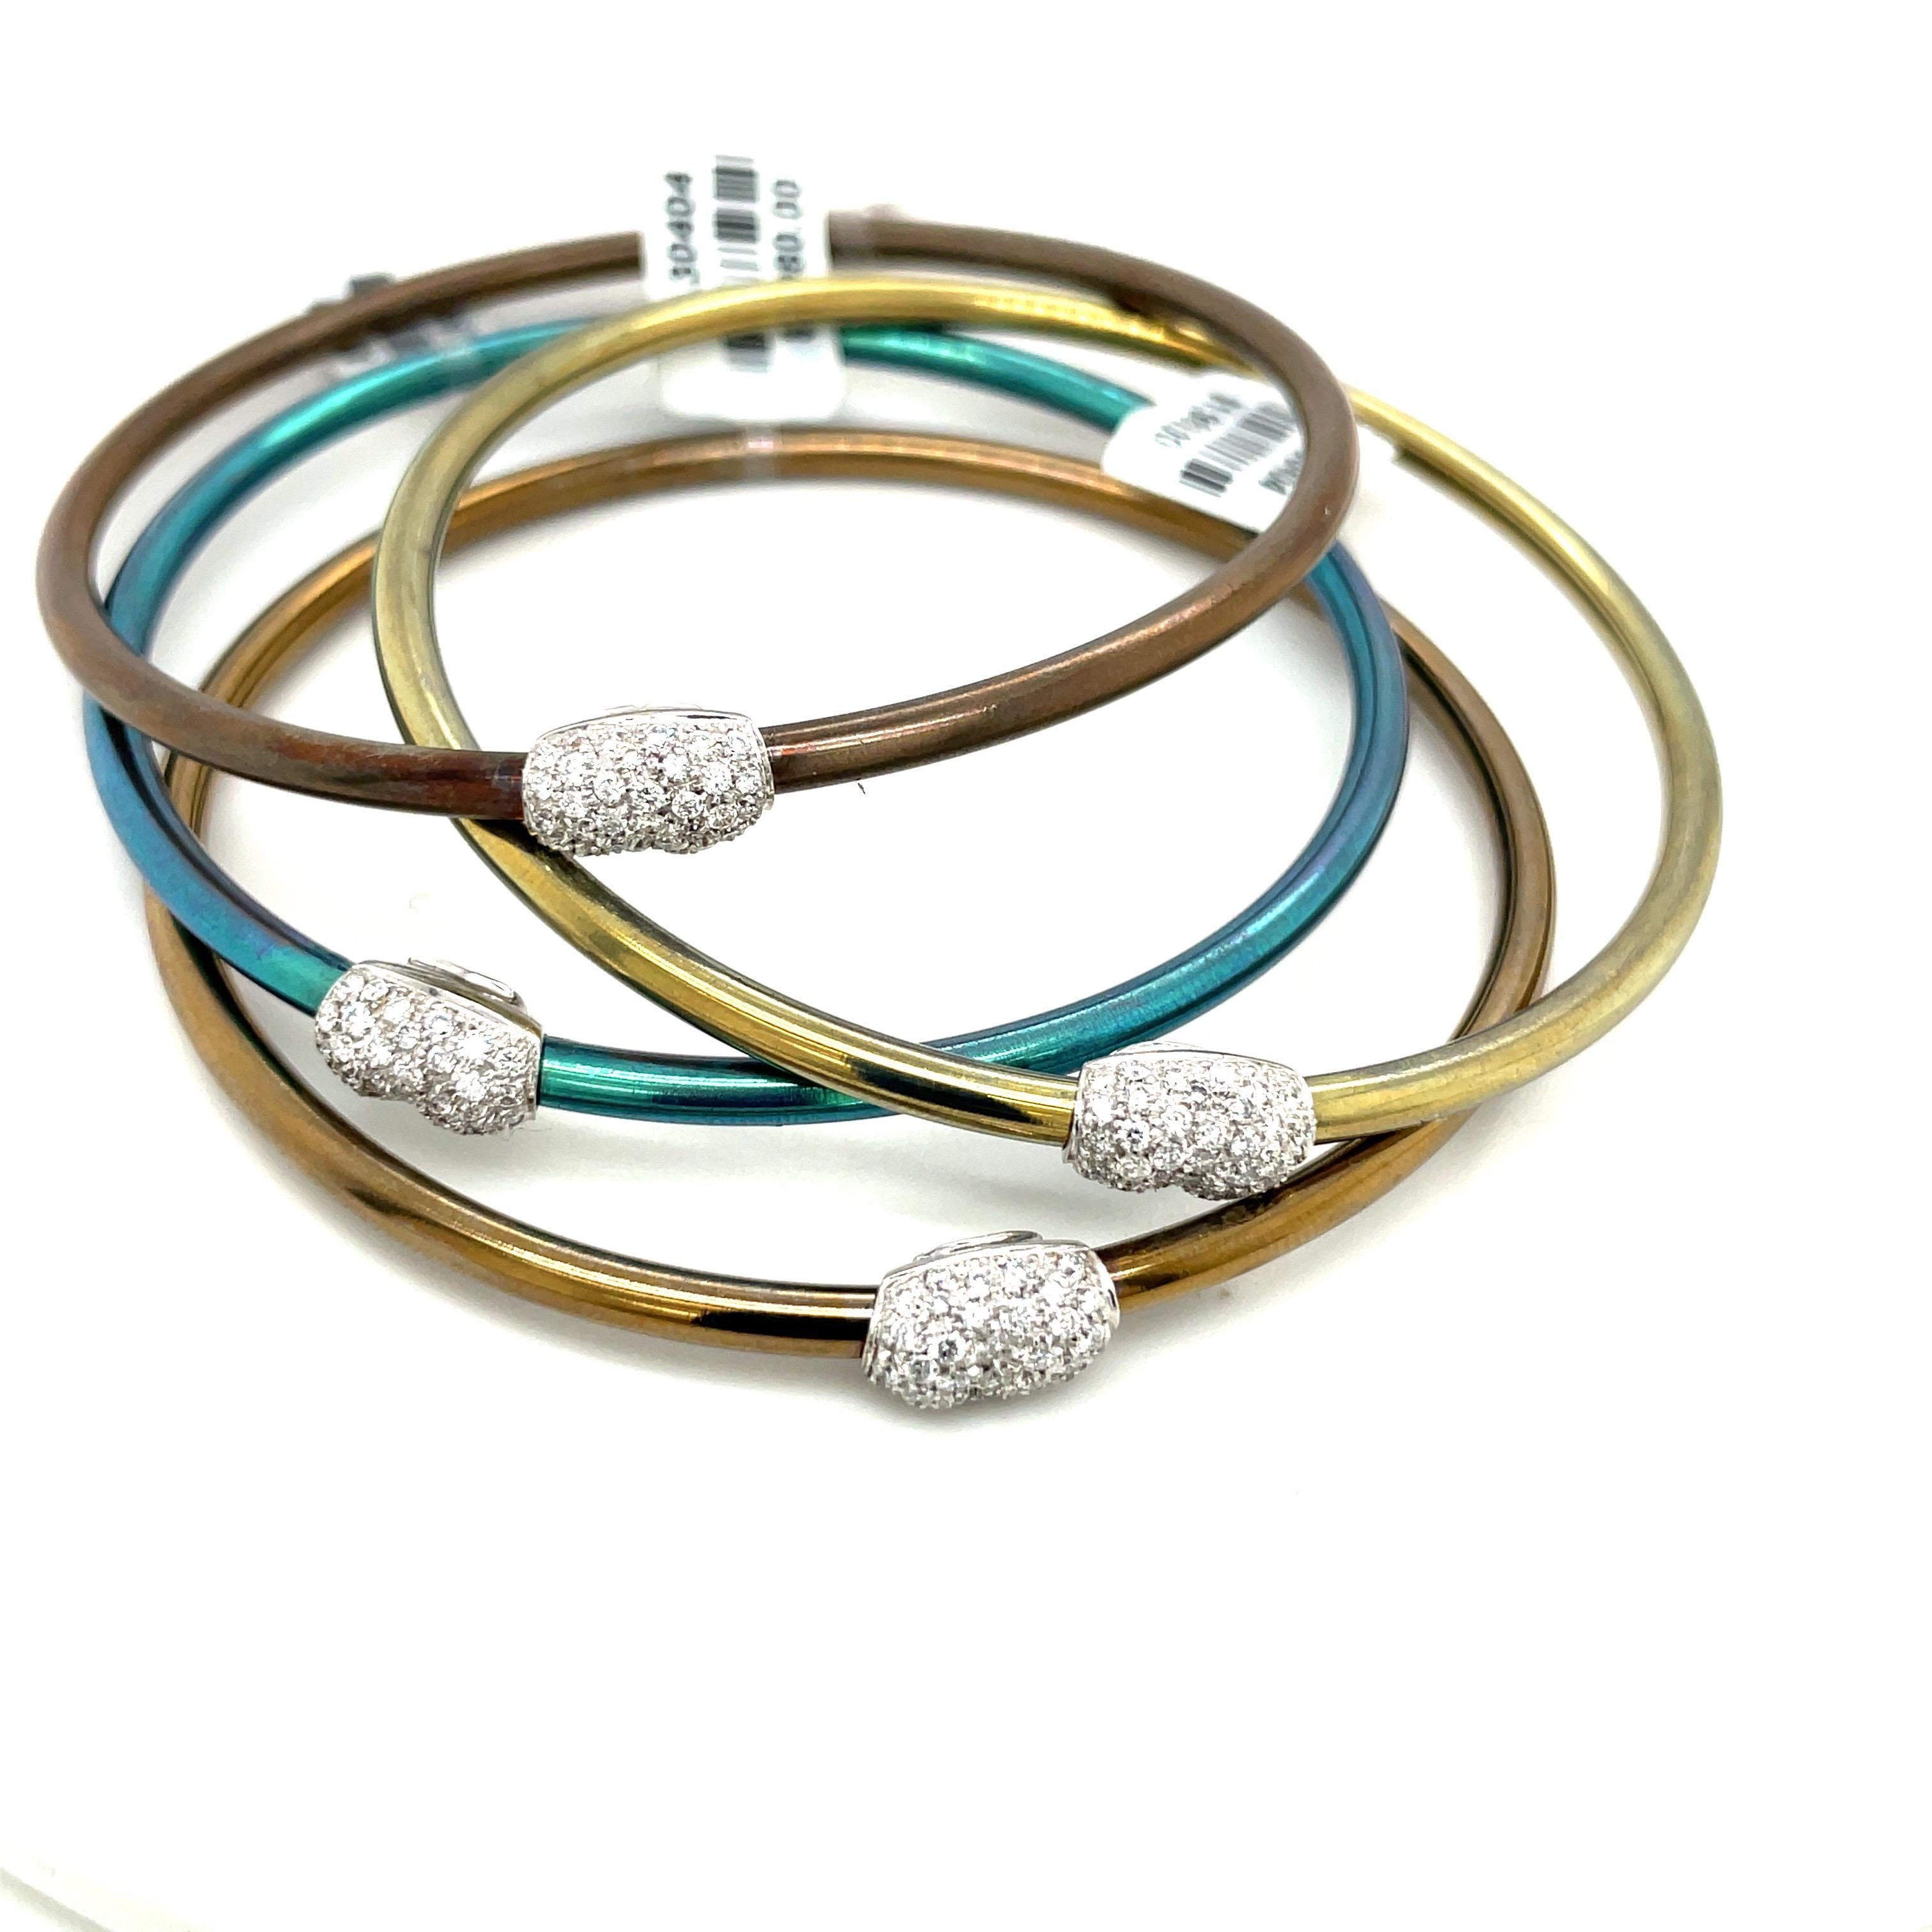 This unique set of bangles is made of colored titanium, which is incredibly lightweight and durable. Accented with and organic 18kt white gold and pave diamond bean, these bangles are sure to spruce up any arm with their charming color and sparkle.